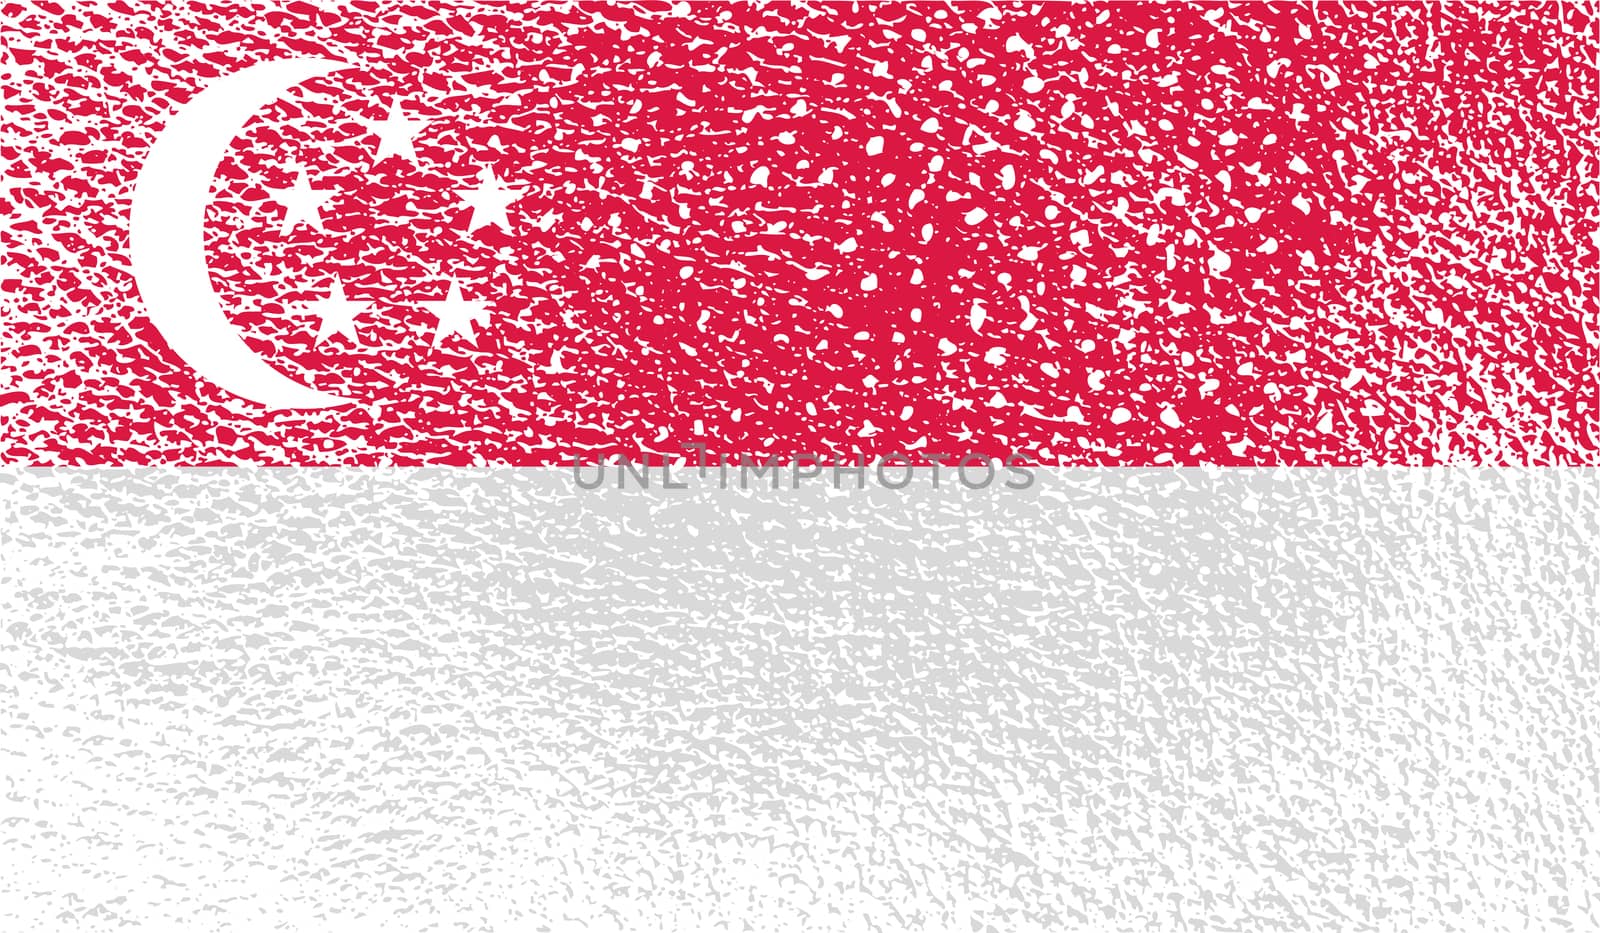 Flag Republic of Singapore with old texture.  illustration